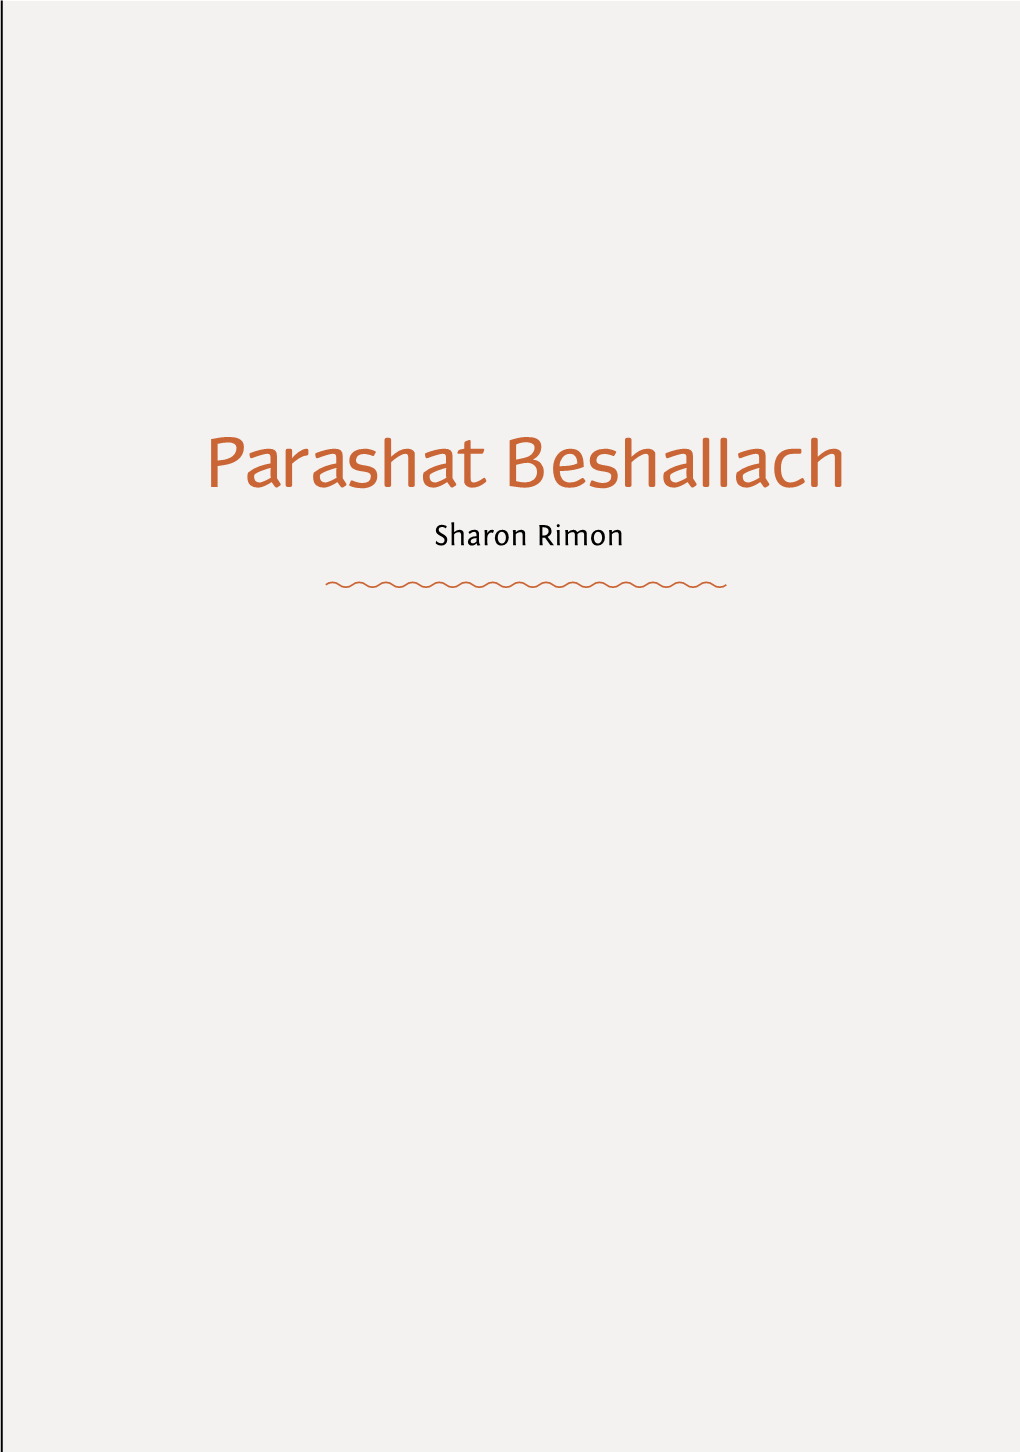 Parashat Beshallach Sharon Rimon the Exodus and the Wanderings in the Desert1